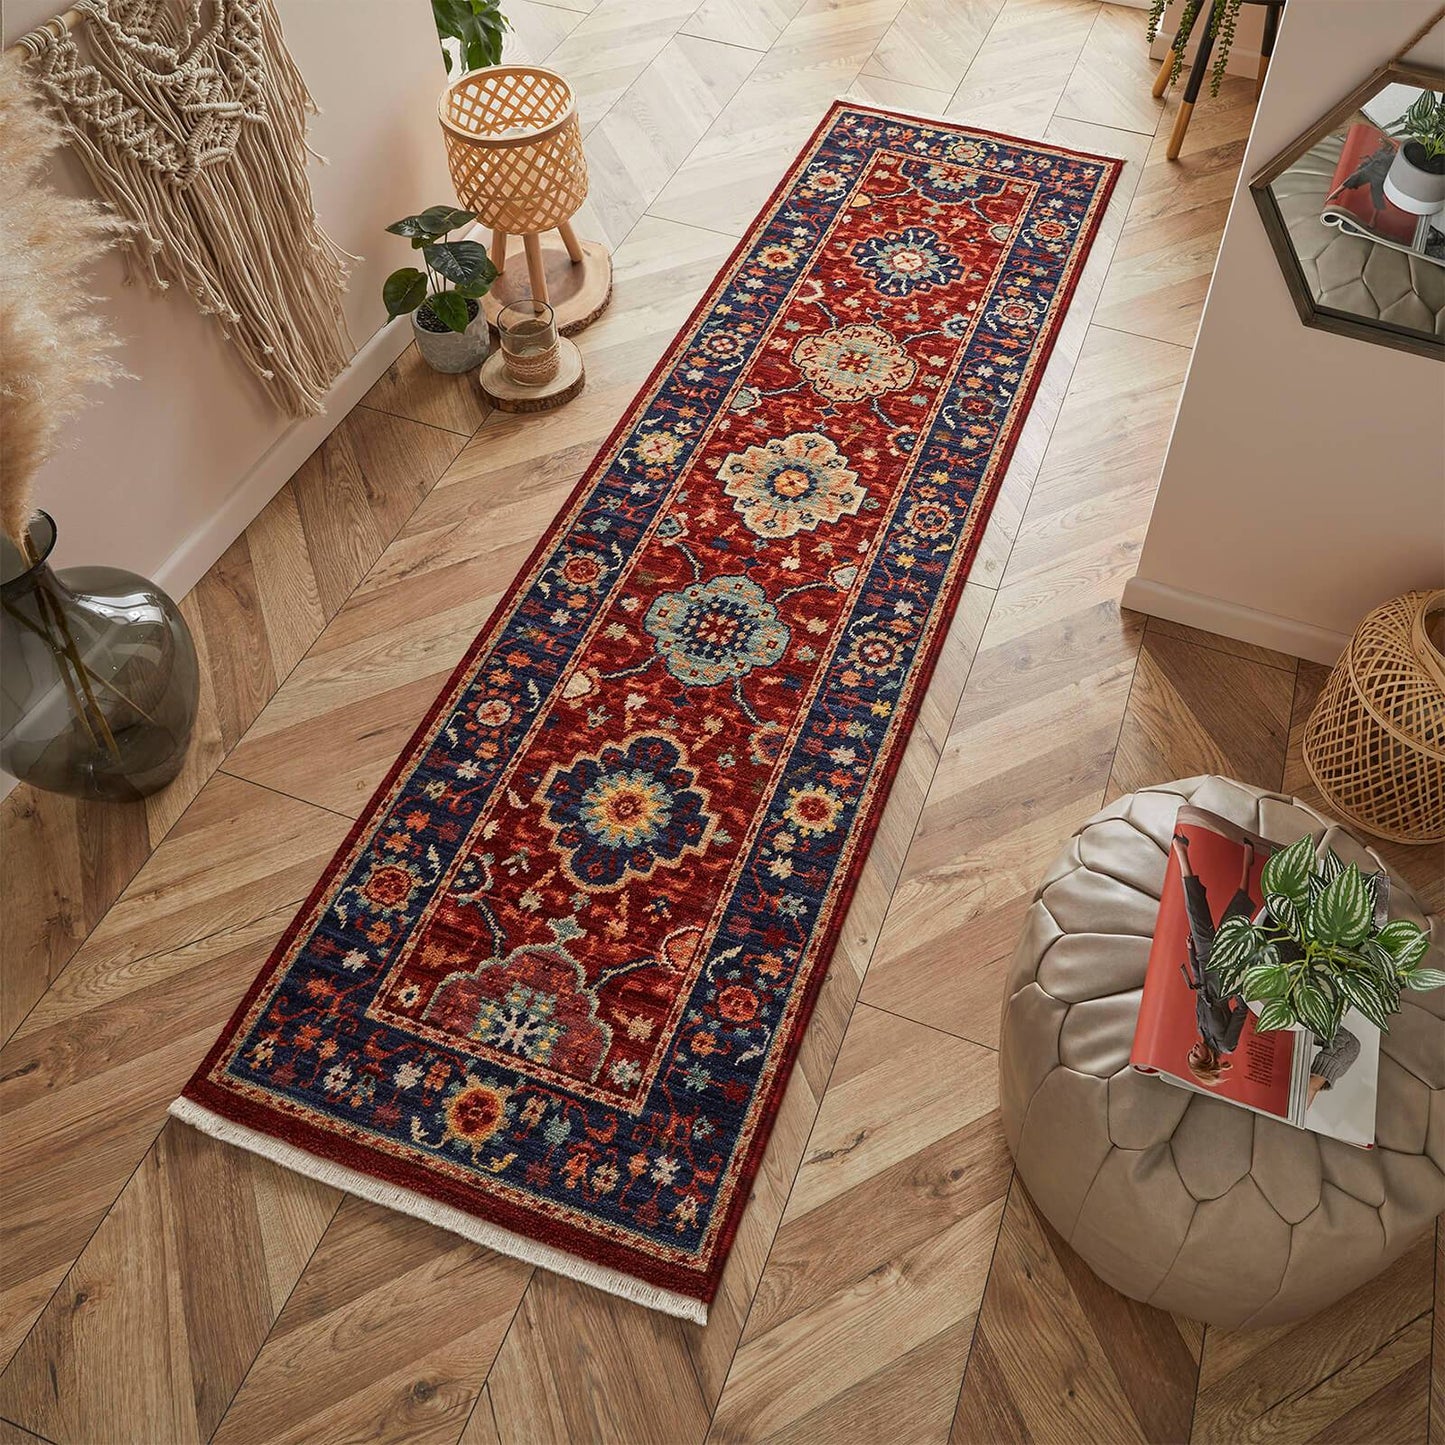 Nomad 4601 S Multicoloured Traditional Rugs